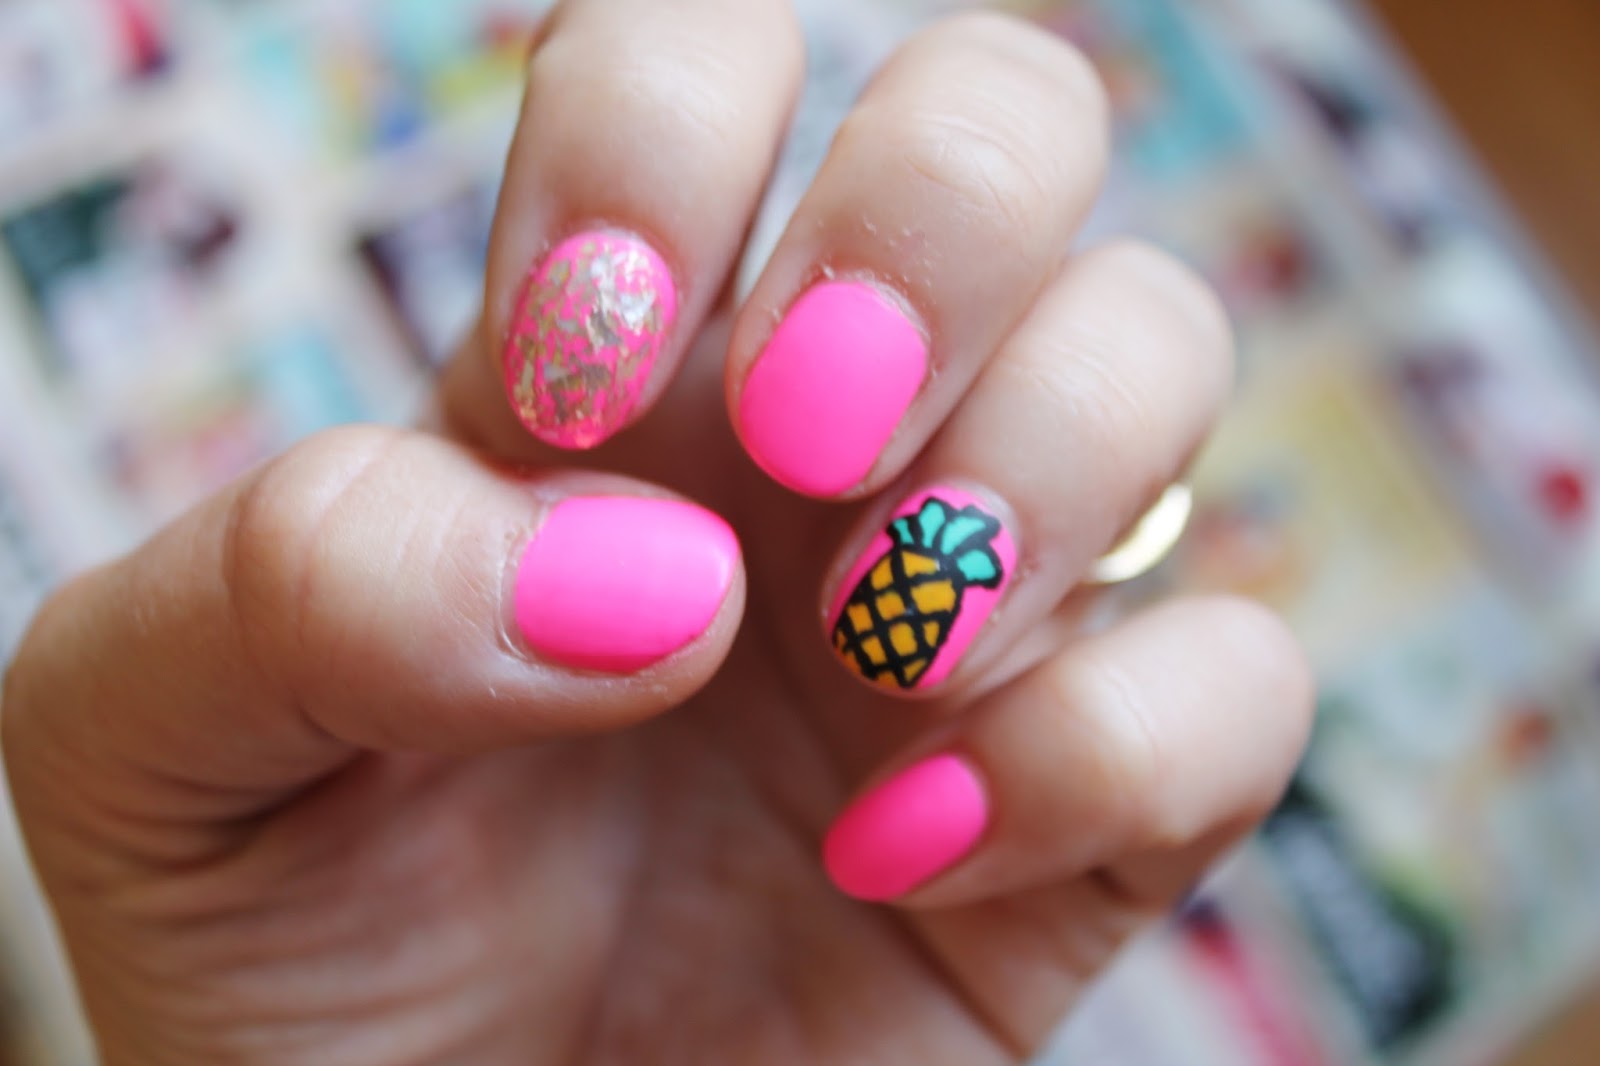 2. Tropical Nail Designs - wide 4